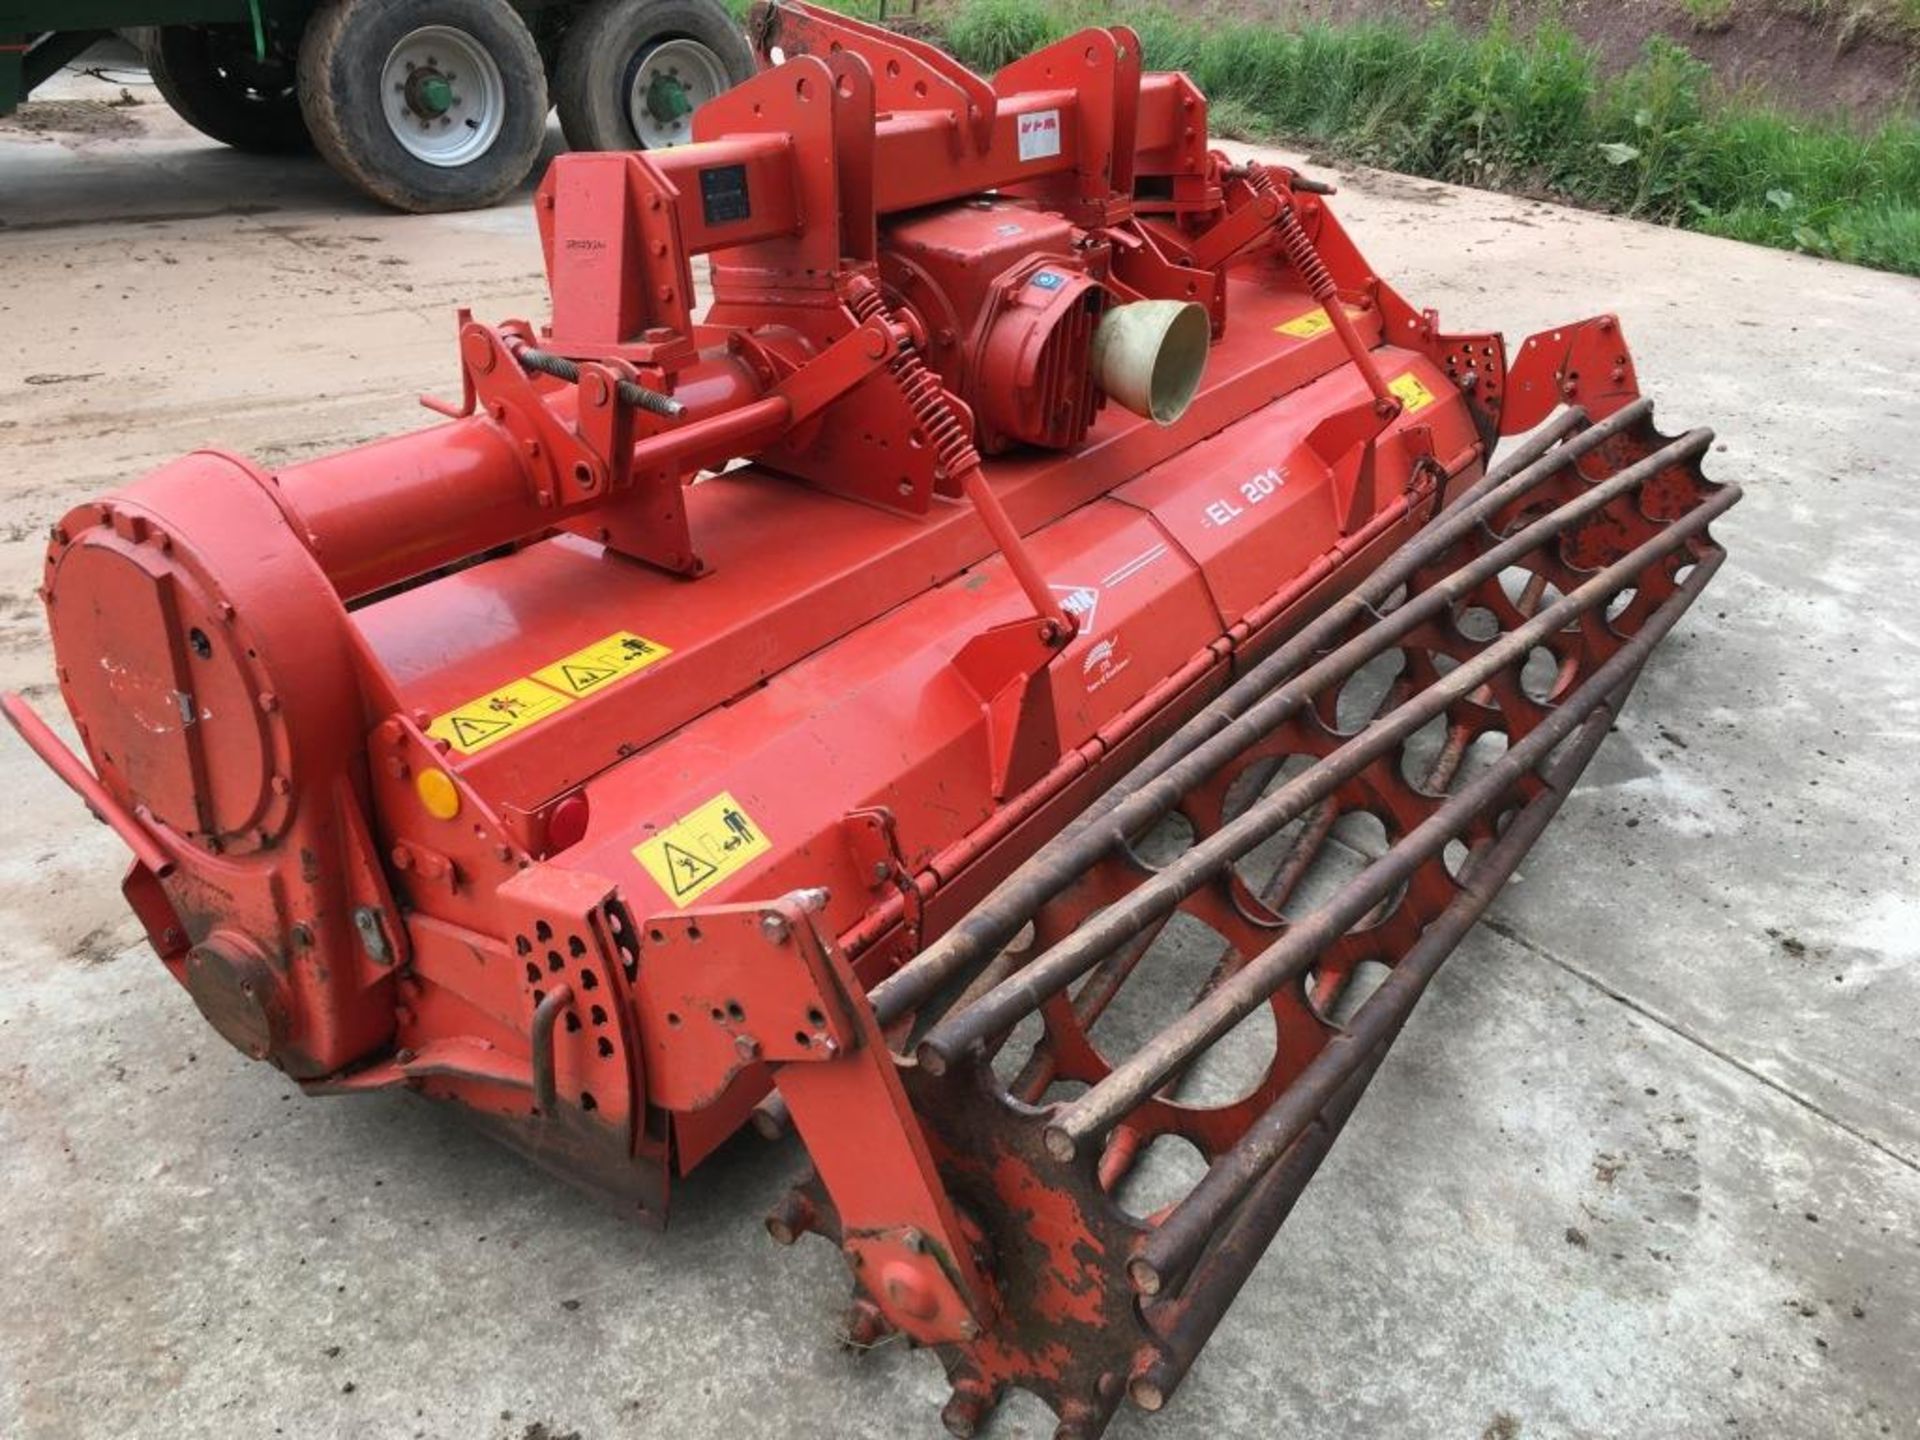 Kuhn Type EL 201-300 rotovator with crumbler roller, serial number: D0388 (2005) - Image 4 of 10